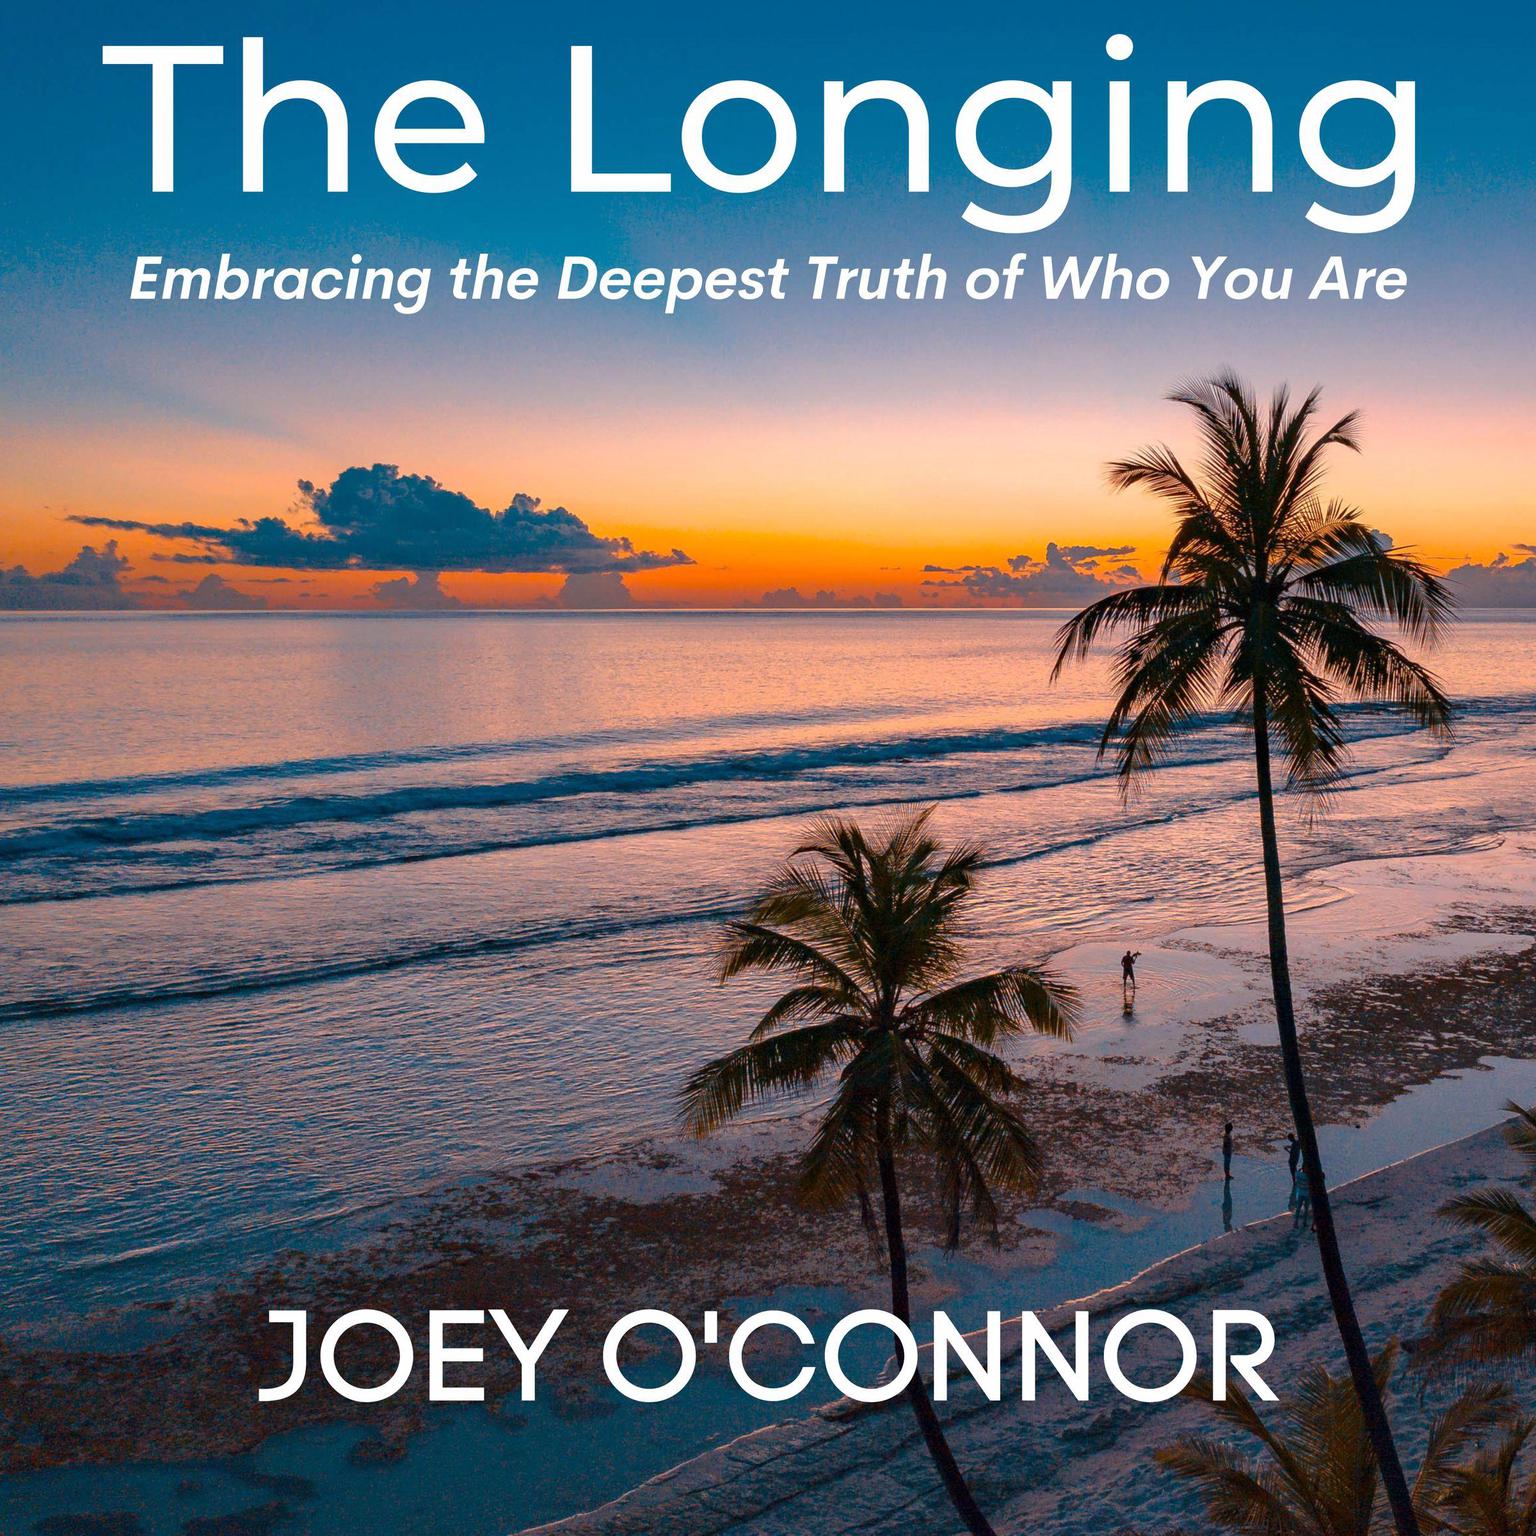 The Longing: Embracing the Deepest Truth of Who You Are Audiobook, by Joey O'Connor